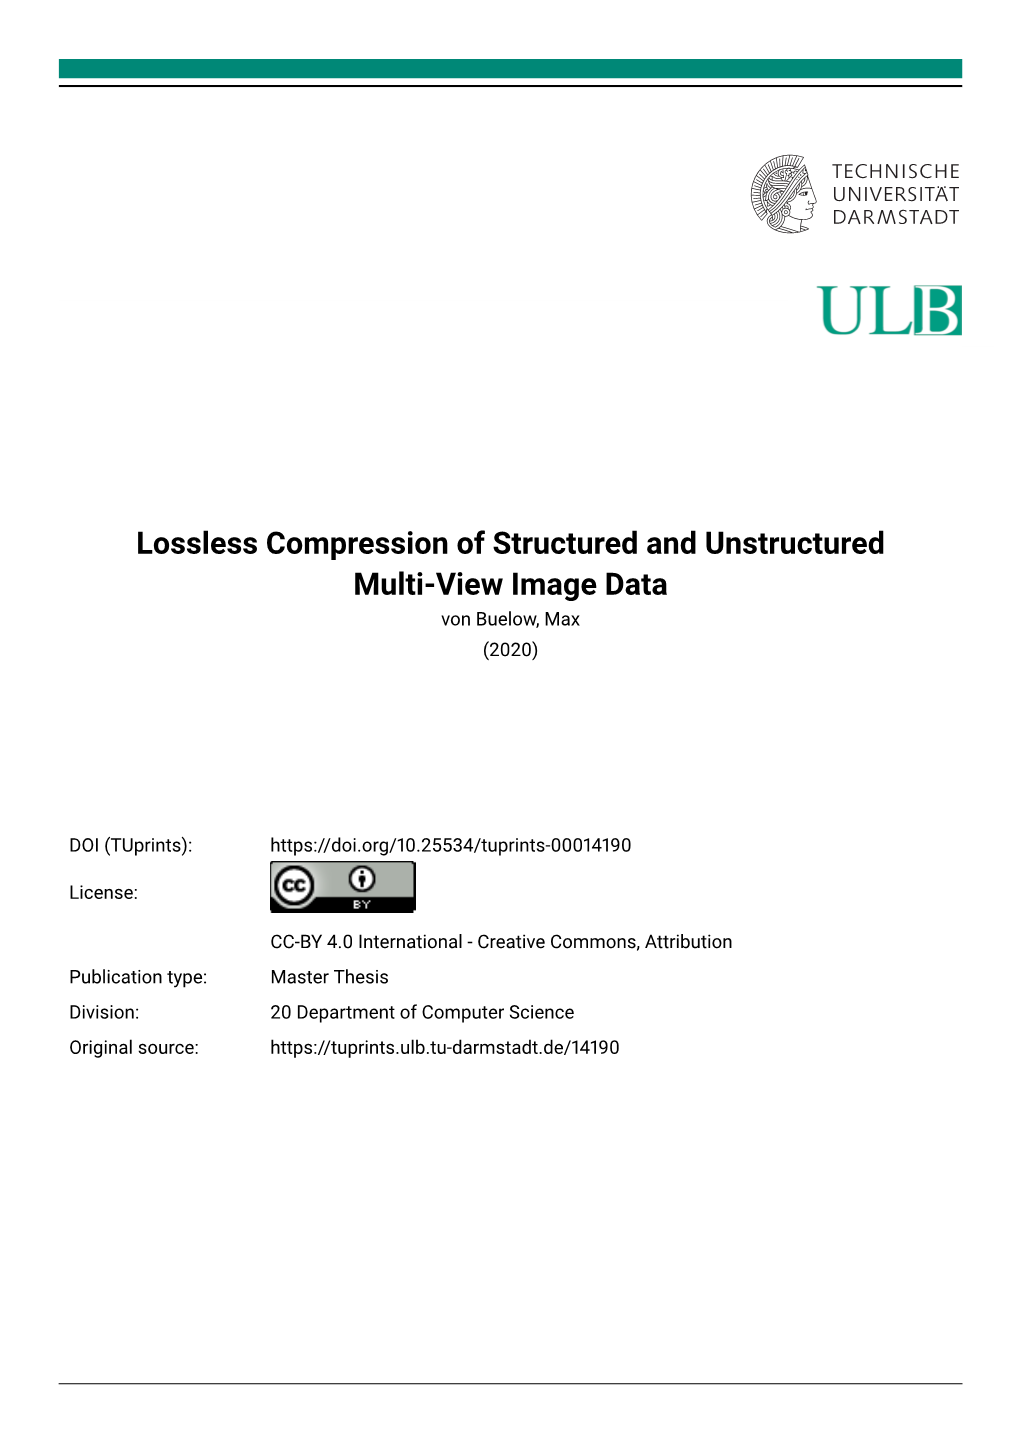 Lossless Compression of Structured and Unstructured Multi-View Image Data Von Buelow, Max (2020)